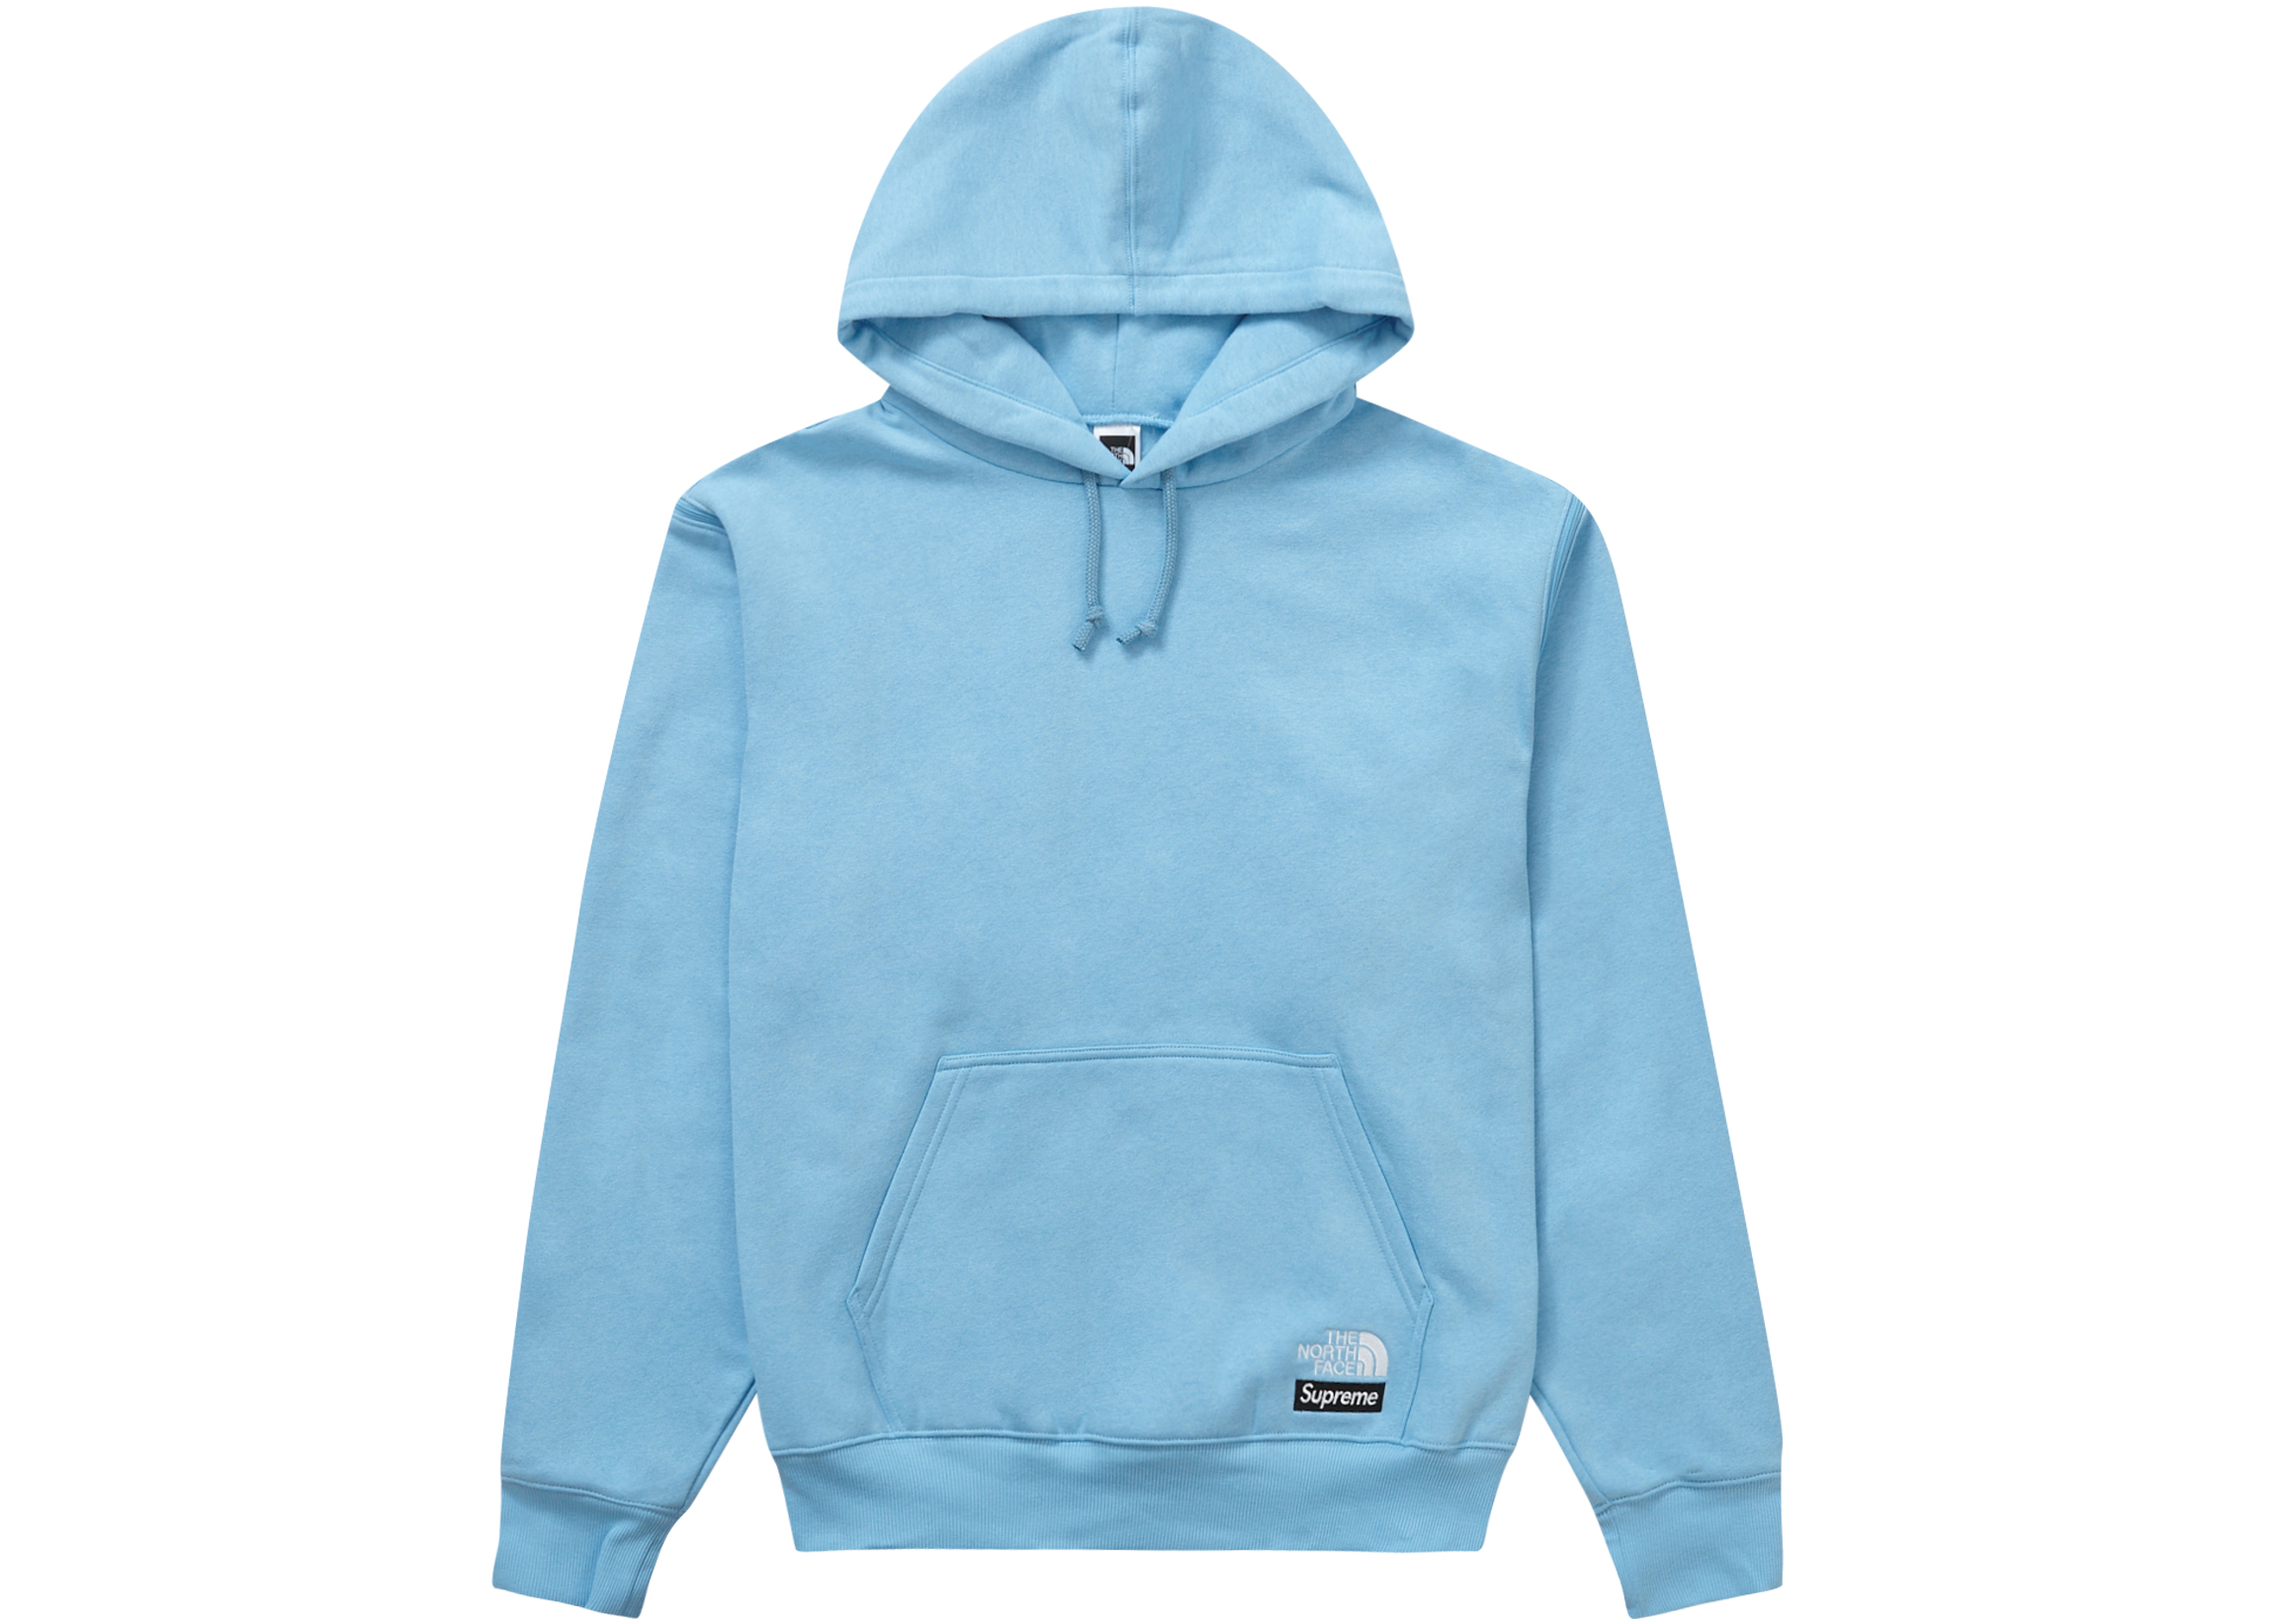 Supreme The North Face Convertible Hooded Sweatshirt Blue 